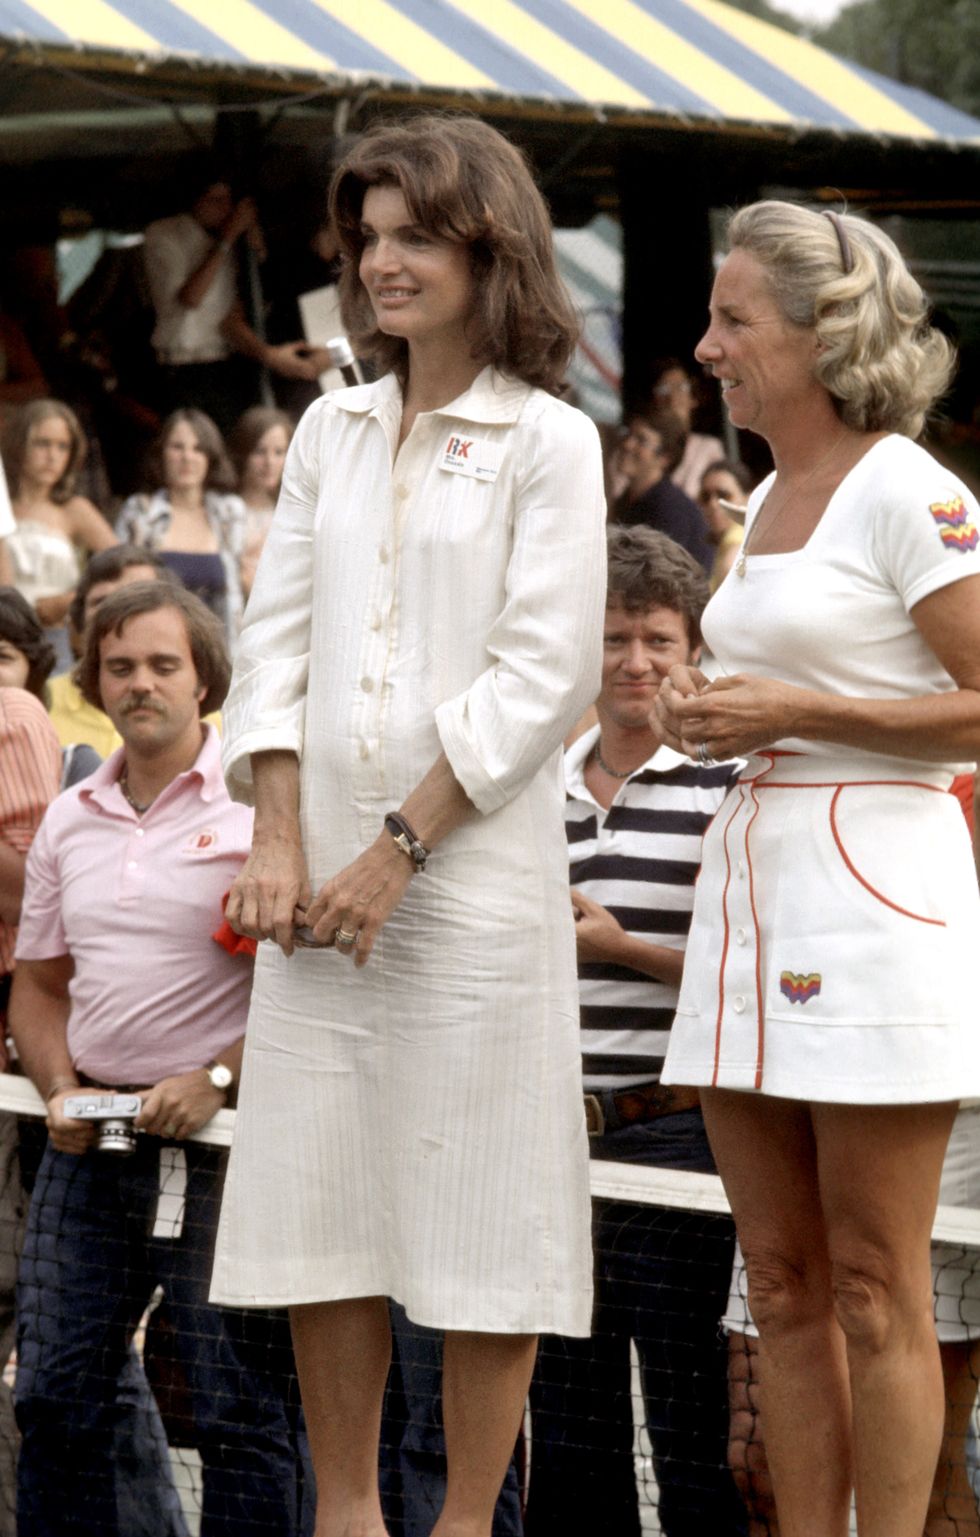 jackie onassis and ethel kennedy during 4th annual rfk pro celebrity tennis tournament at forest hills in forest hills, new york, united states photo by ron galella, ltdron galella collection via getty images